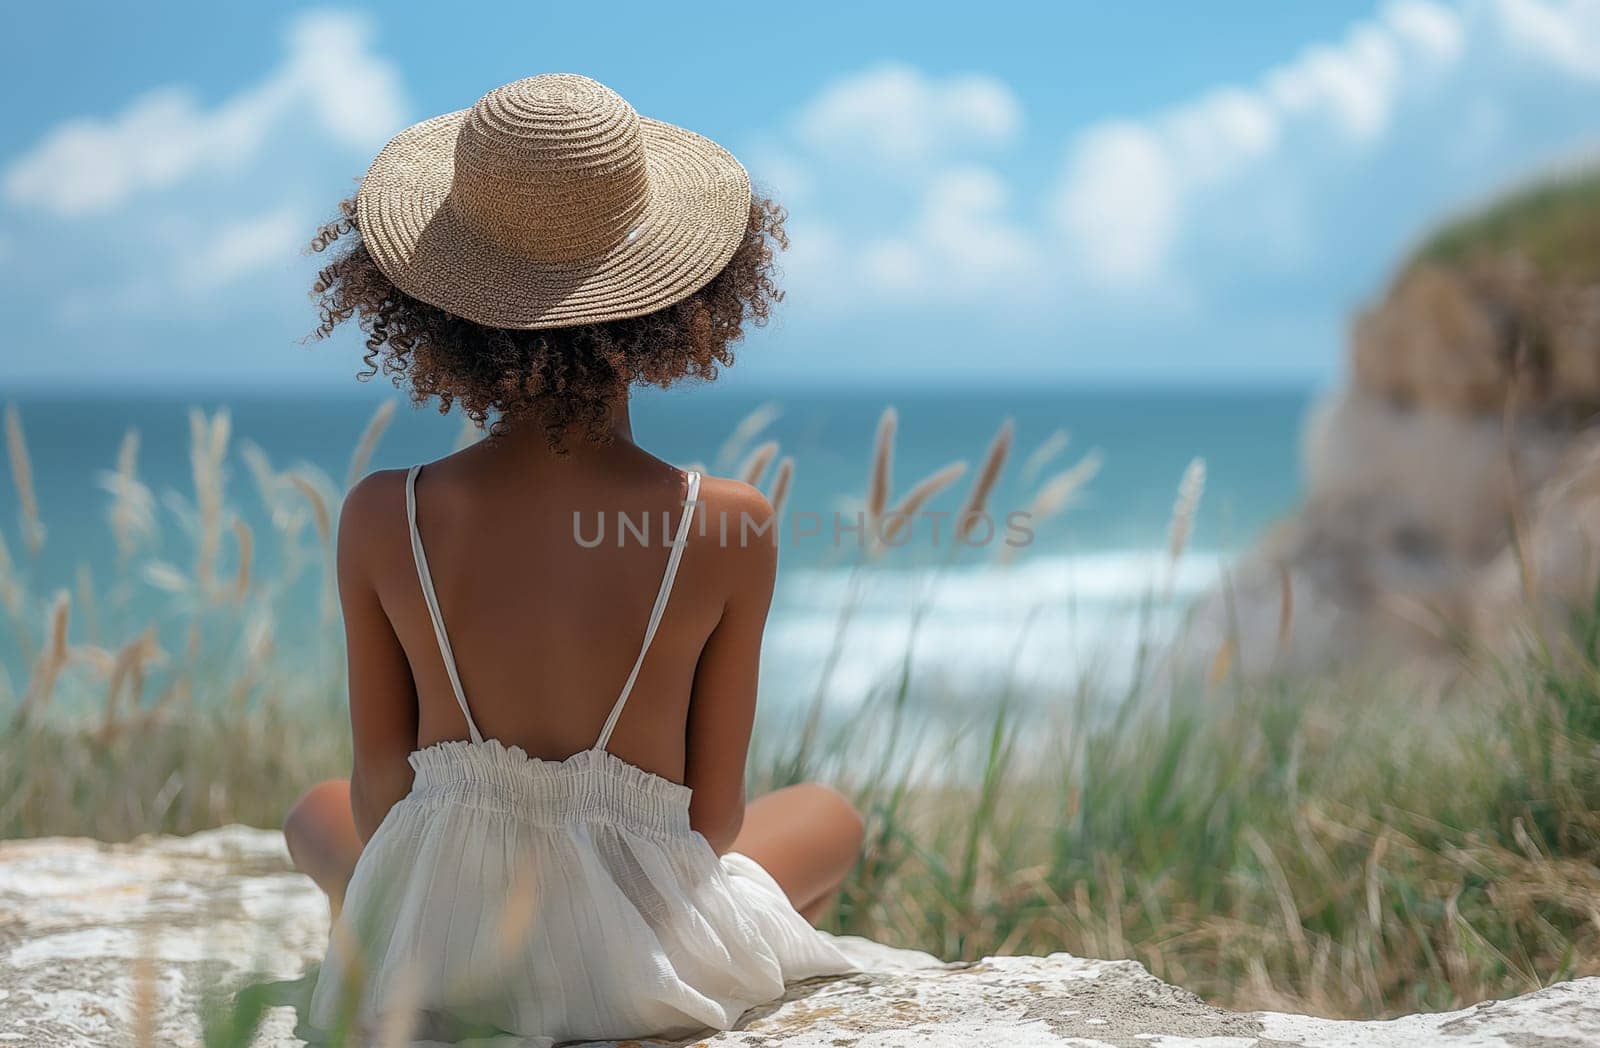 Black Woman in hat sitting peacefully on beachfront facing the ocean